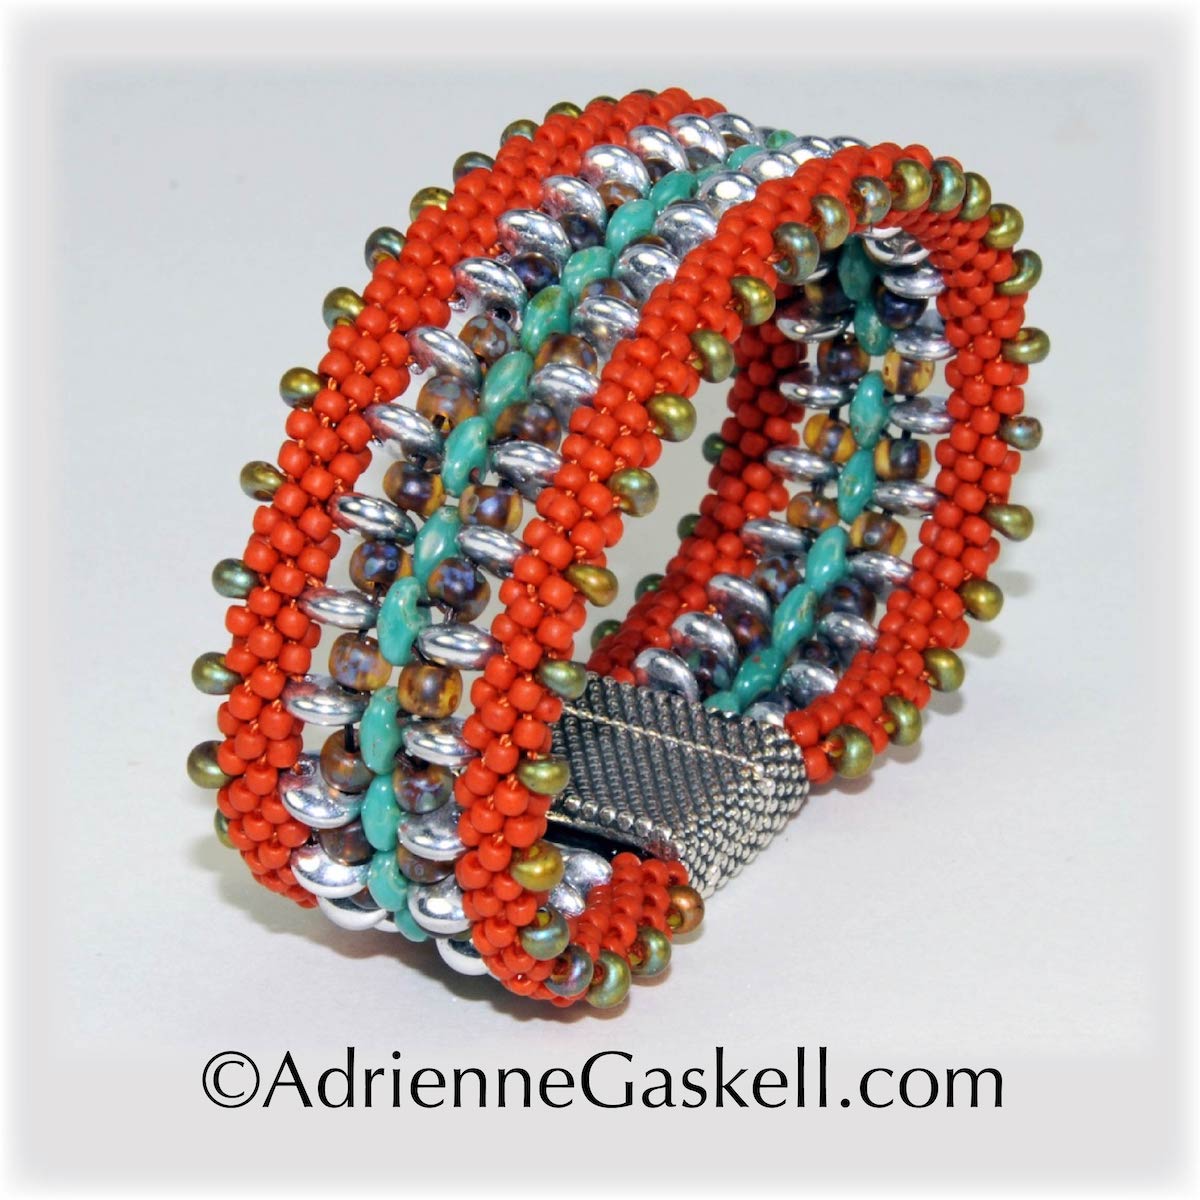 This project was featured in Bead & Button Magazine as Elegant Ombre Braids, December 2019. This bracelet achieves dimensional impact by stacking and then joining three separate braids together. Czech teardrop beads with a rainbow AB finish are the crowning glory.